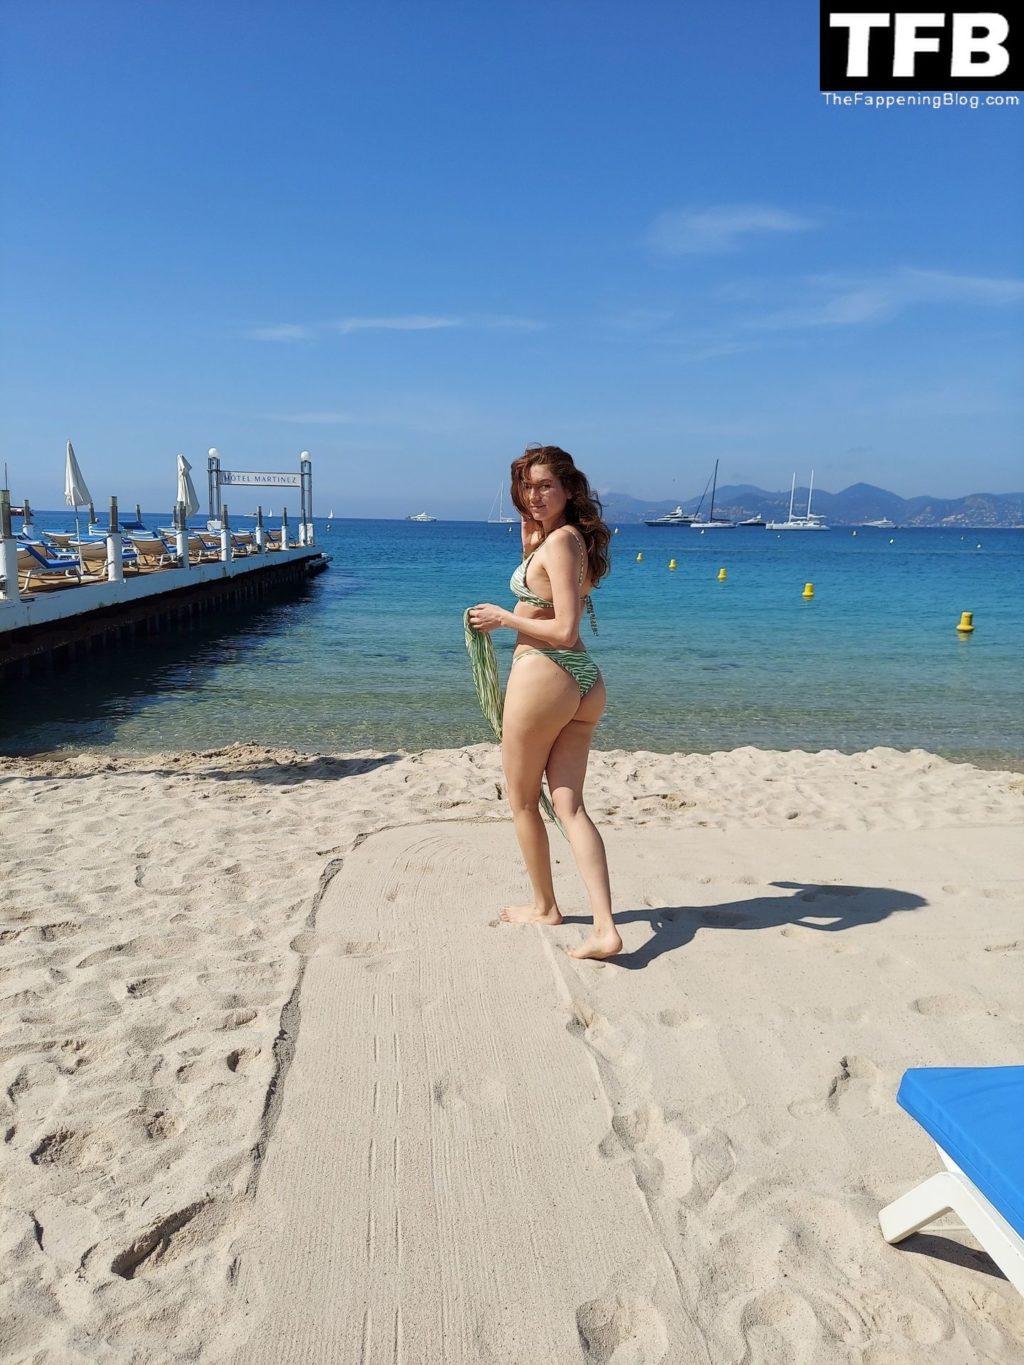 Blanca Blanco Sexy The Fappening Blog 9 1 1024x1365 - Blanca Blanco Enjoys a Beach Day While Attending Cannes Film Festival (27 Photos)